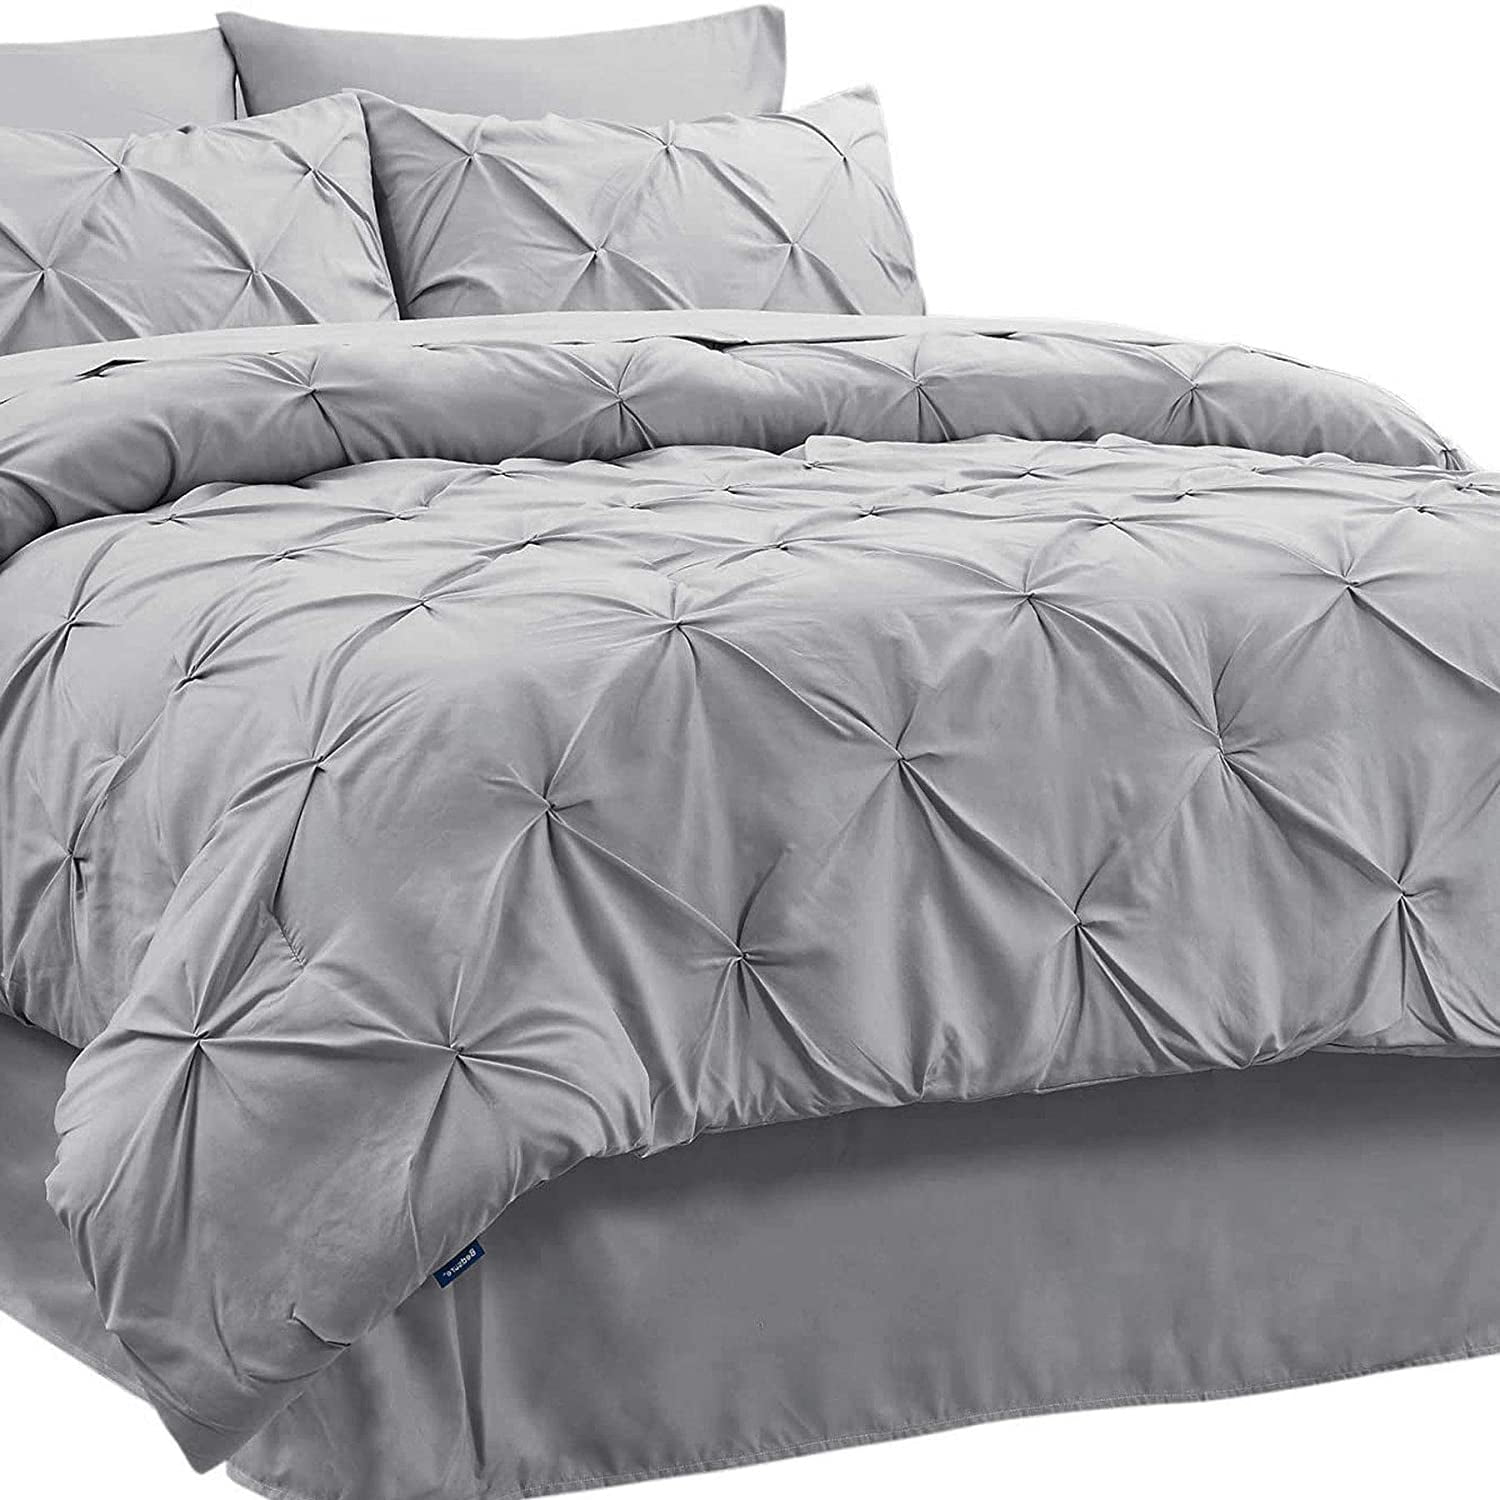 Bedsure King Comforter Sets Size, How To Put On King Duvet Cover